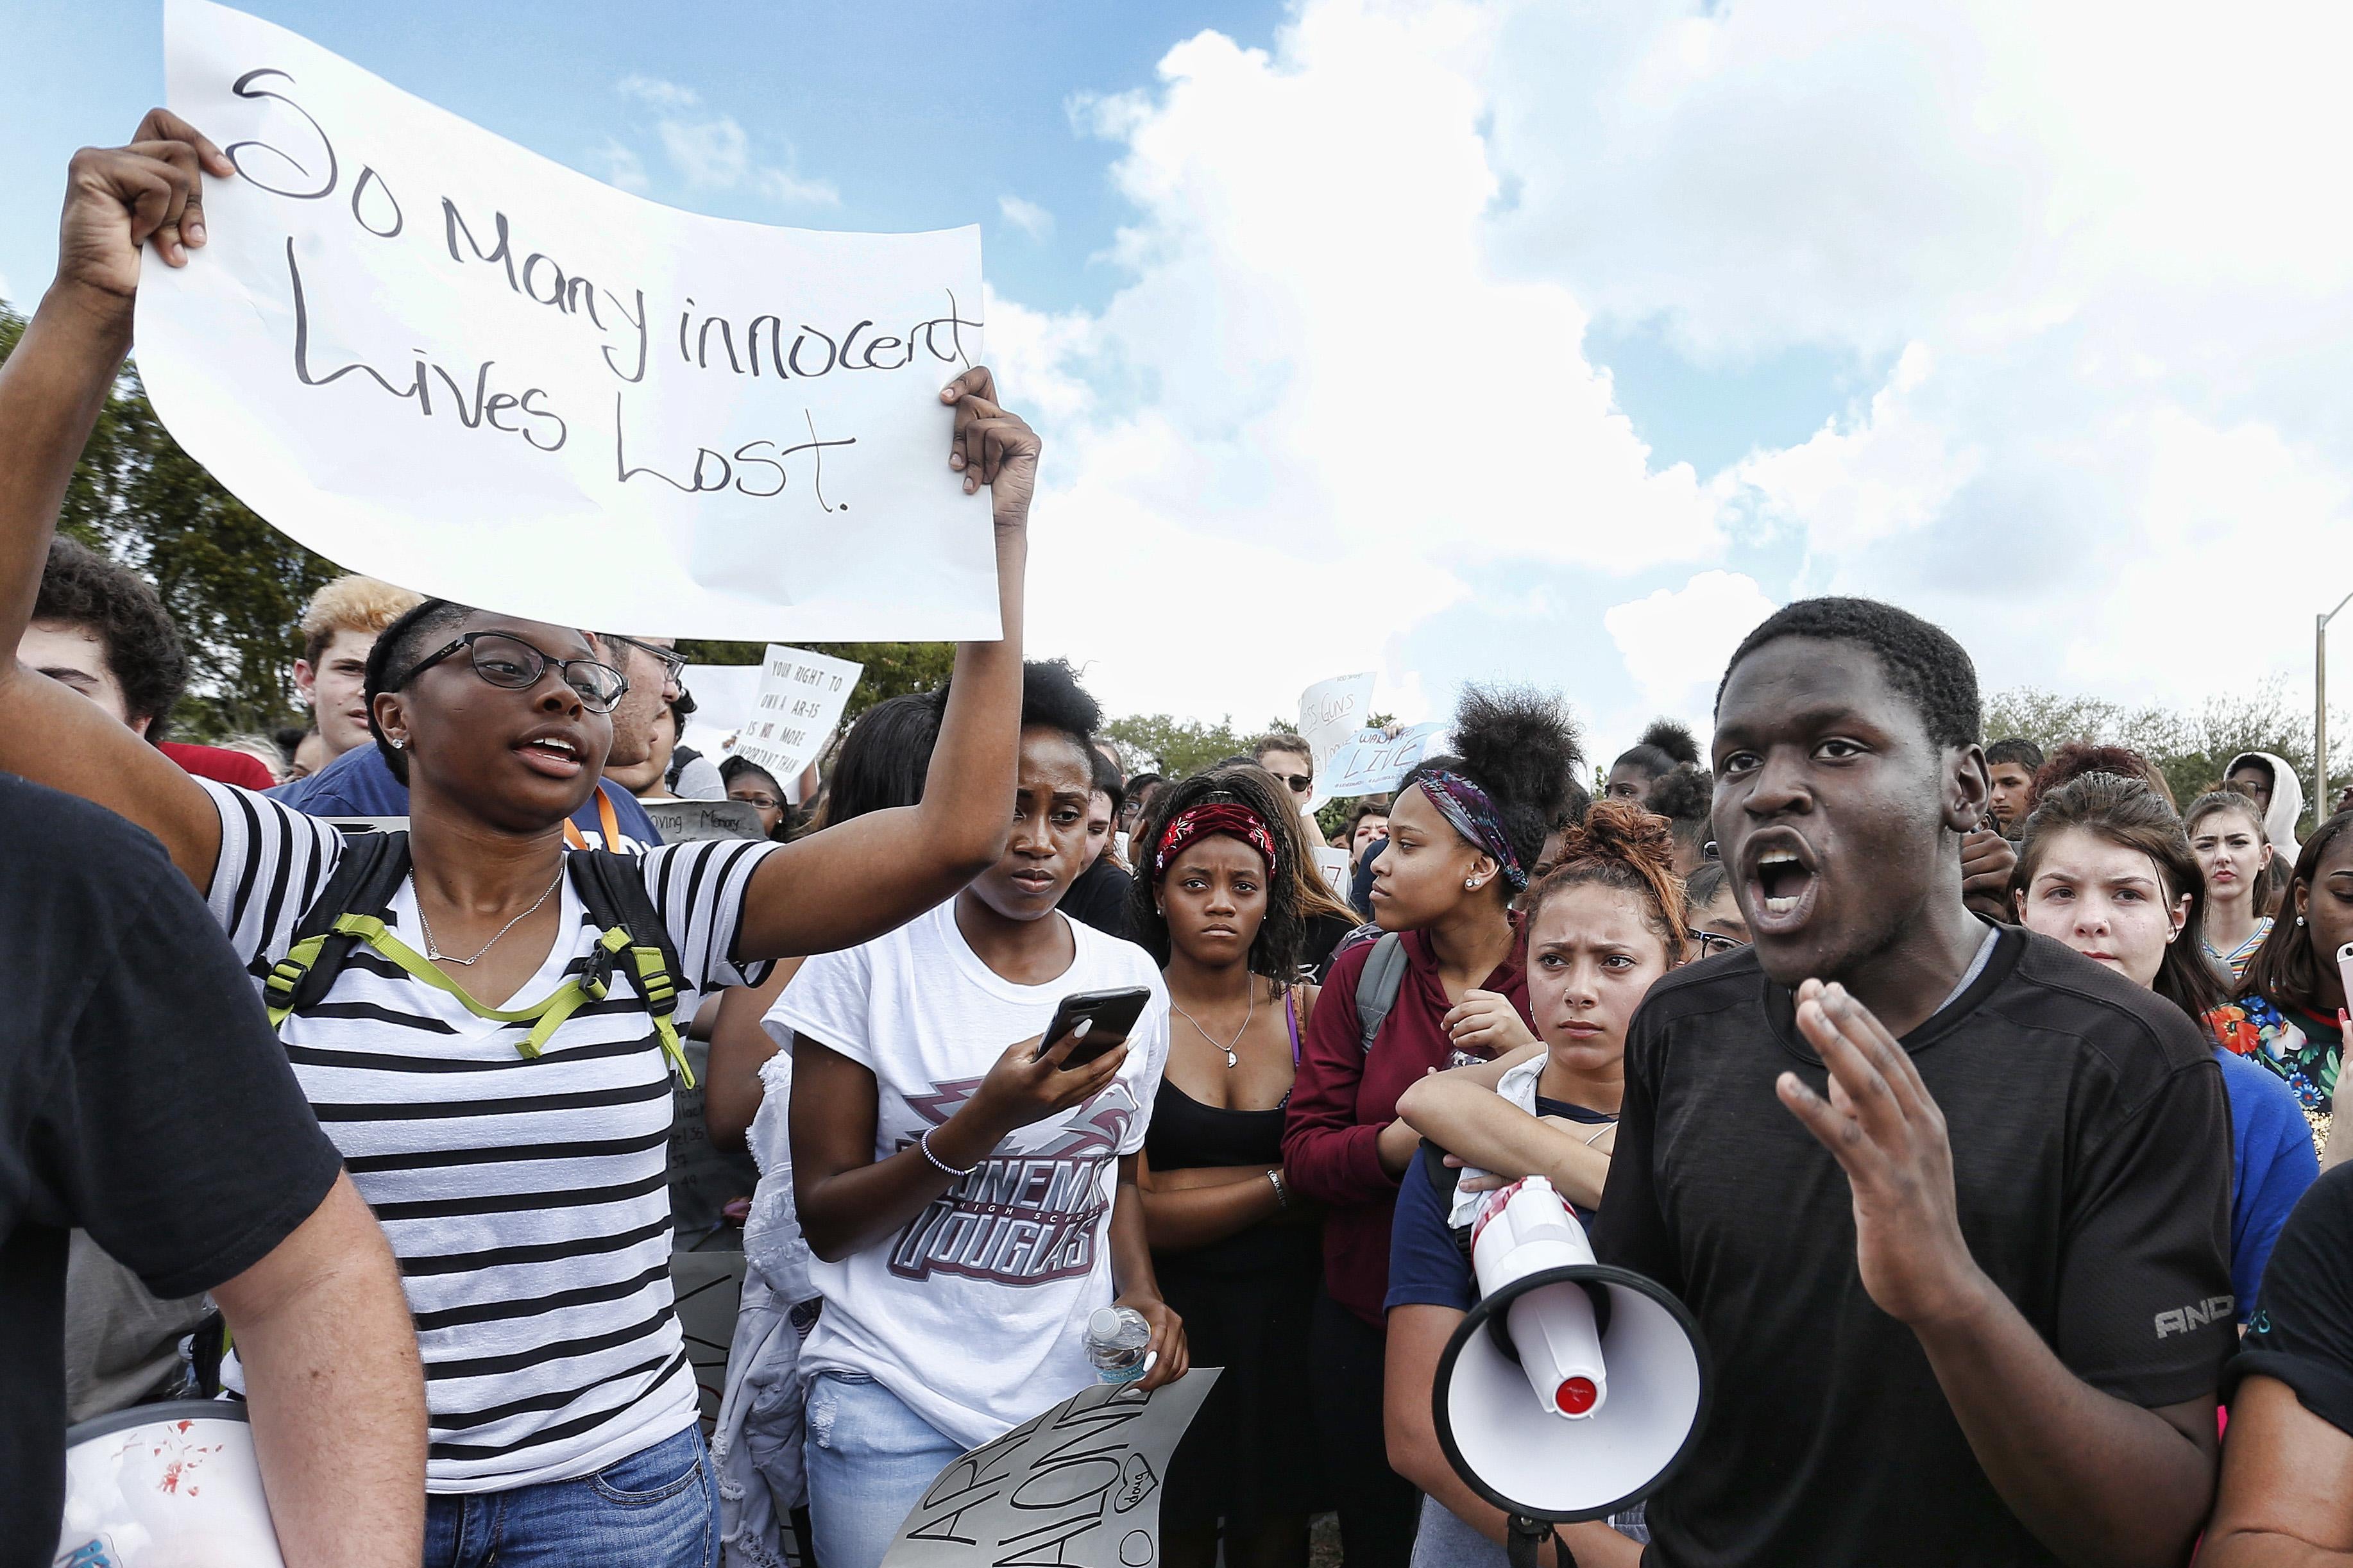 Students of area High Schools rally at Marjory Stoneman Douglas High School after participating in a county wide school walk out in Parkland, Florida on February 21, 2018. 
A former student, Nikolas Cruz, opened fire at Marjory Stoneman Douglas High School leaving 17 people dead and 15 injured on February 14. / AFP PHOTO / RHONA WISE        (Photo credit should read RHONA WISE/AFP/Getty Images)